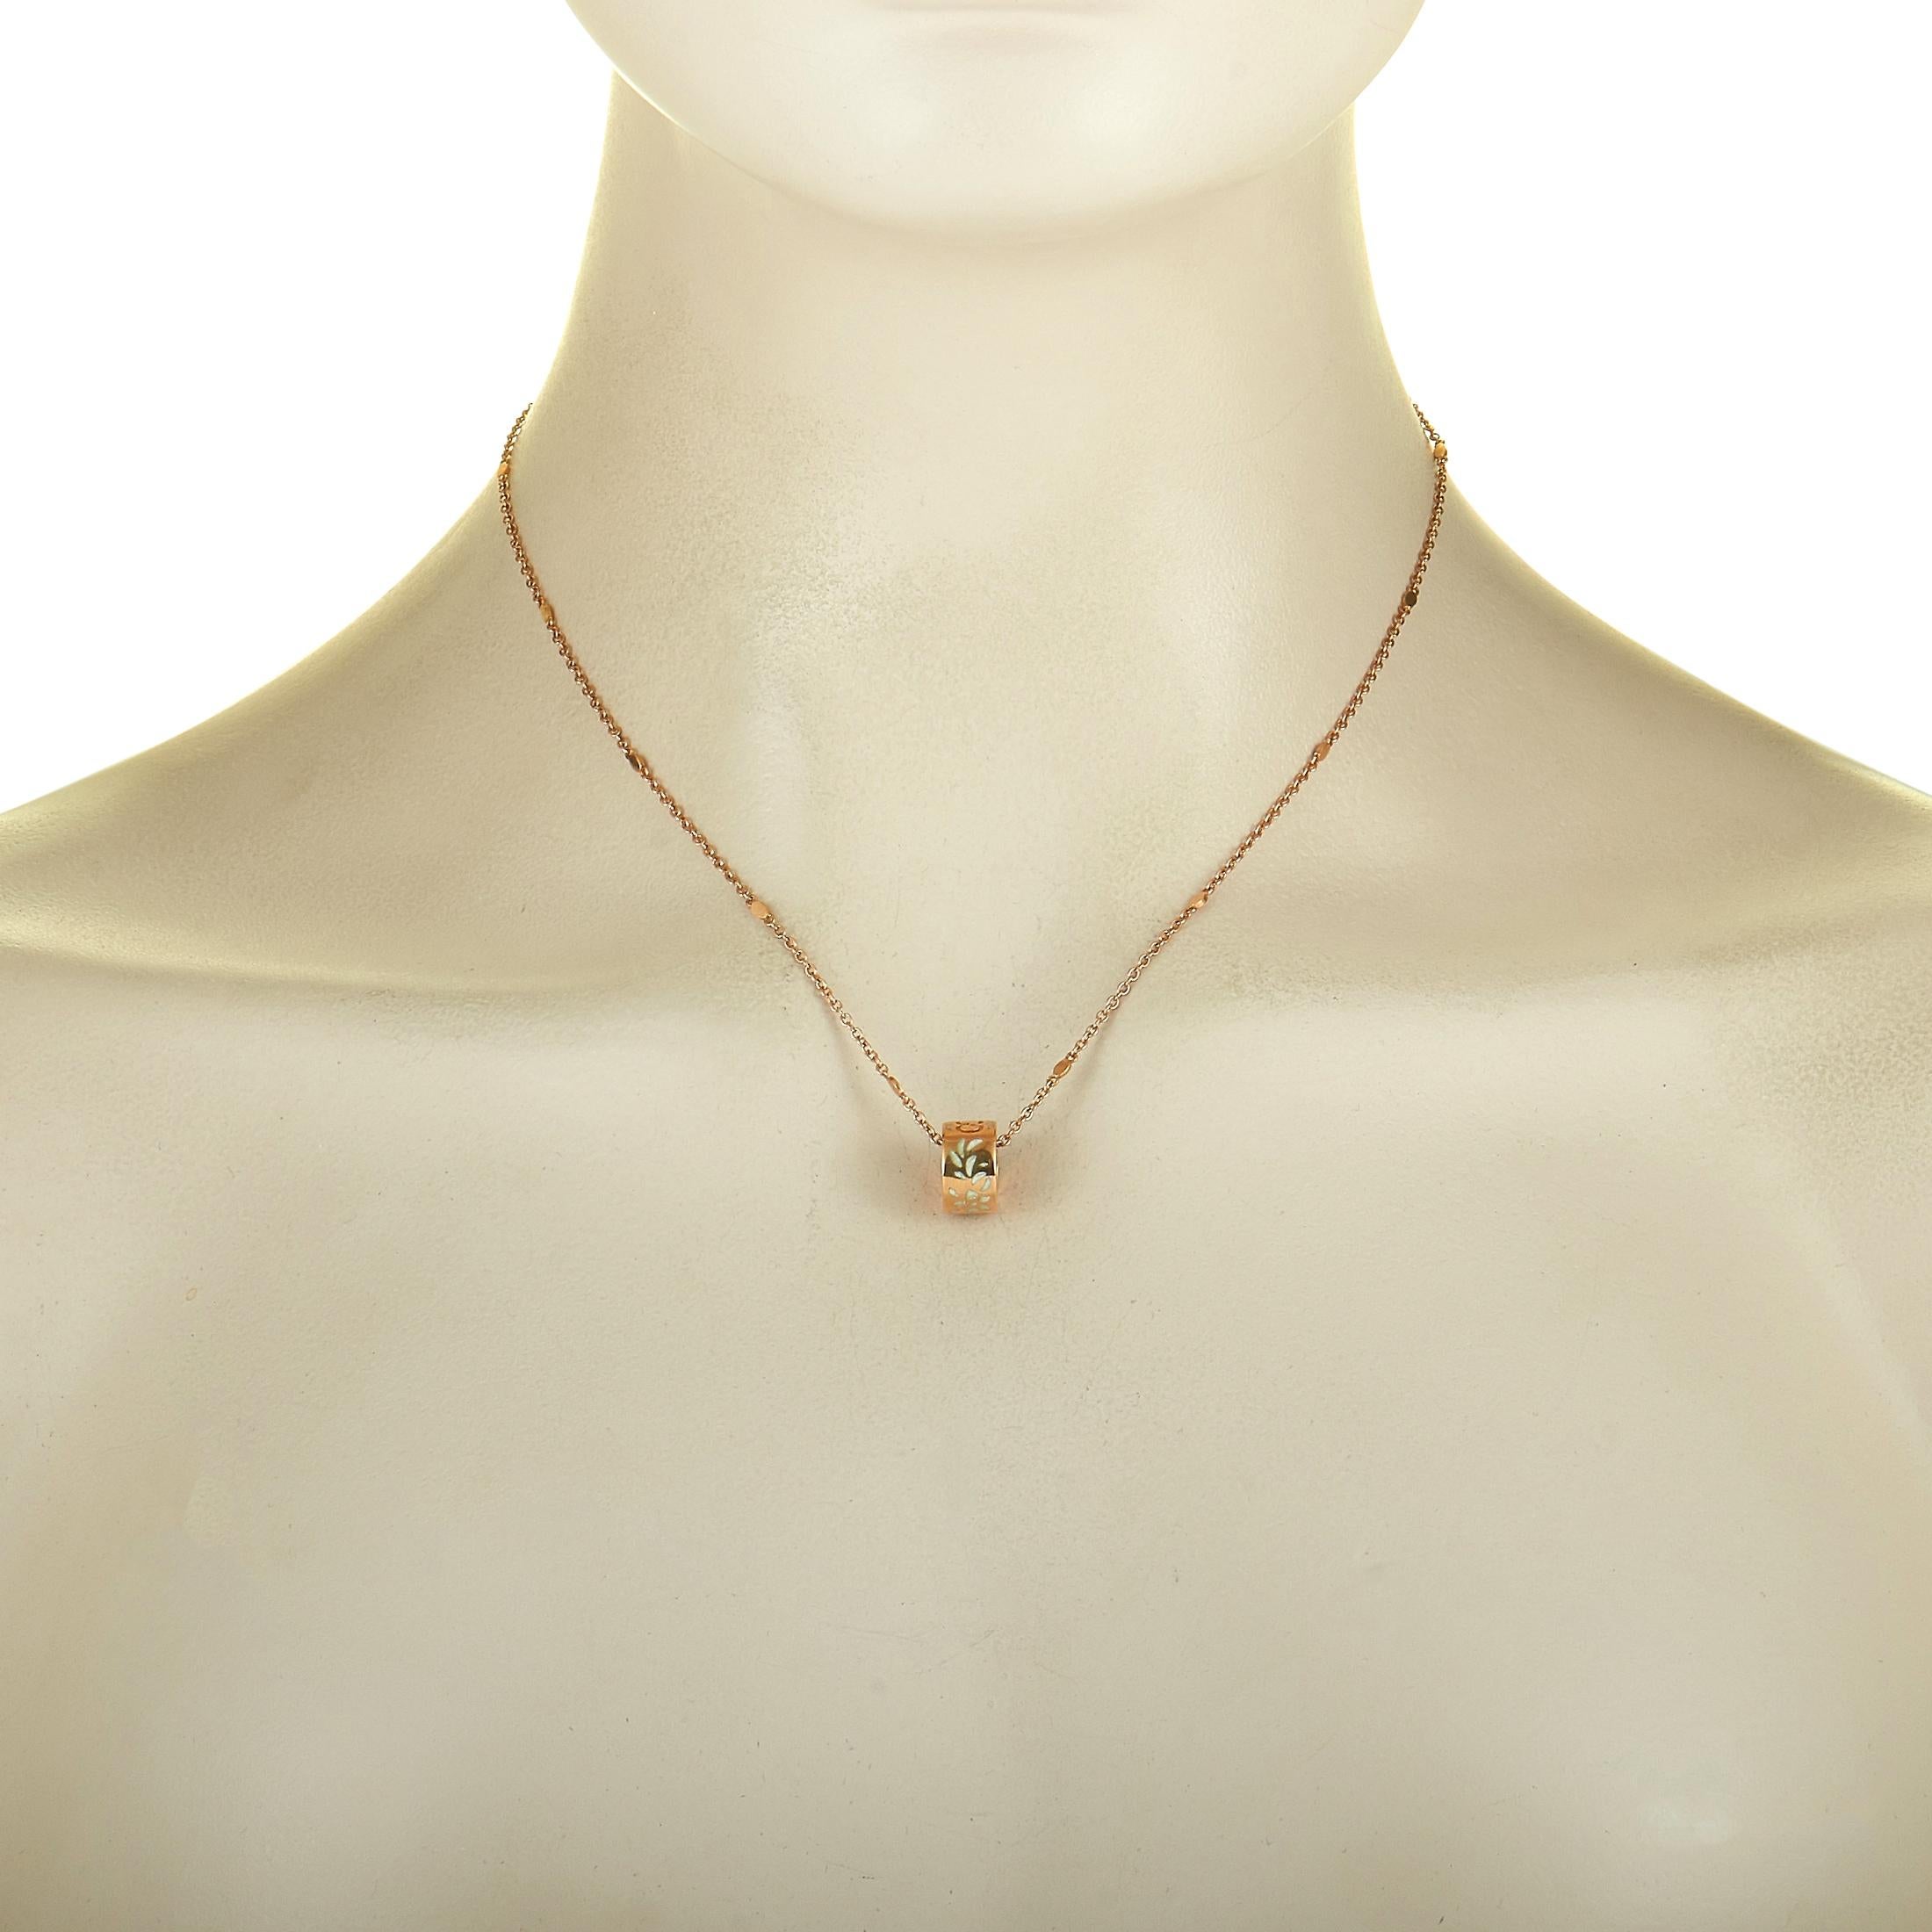 The Gucci “Icon Blossom” necklace is made out of 18K rose gold and white enamel and weighs 6 grams. The necklace boasts a 16” chain and a pendant that measures 0.40” in length and 0.40” in width.
 
 This jewelry piece is offered in brand new